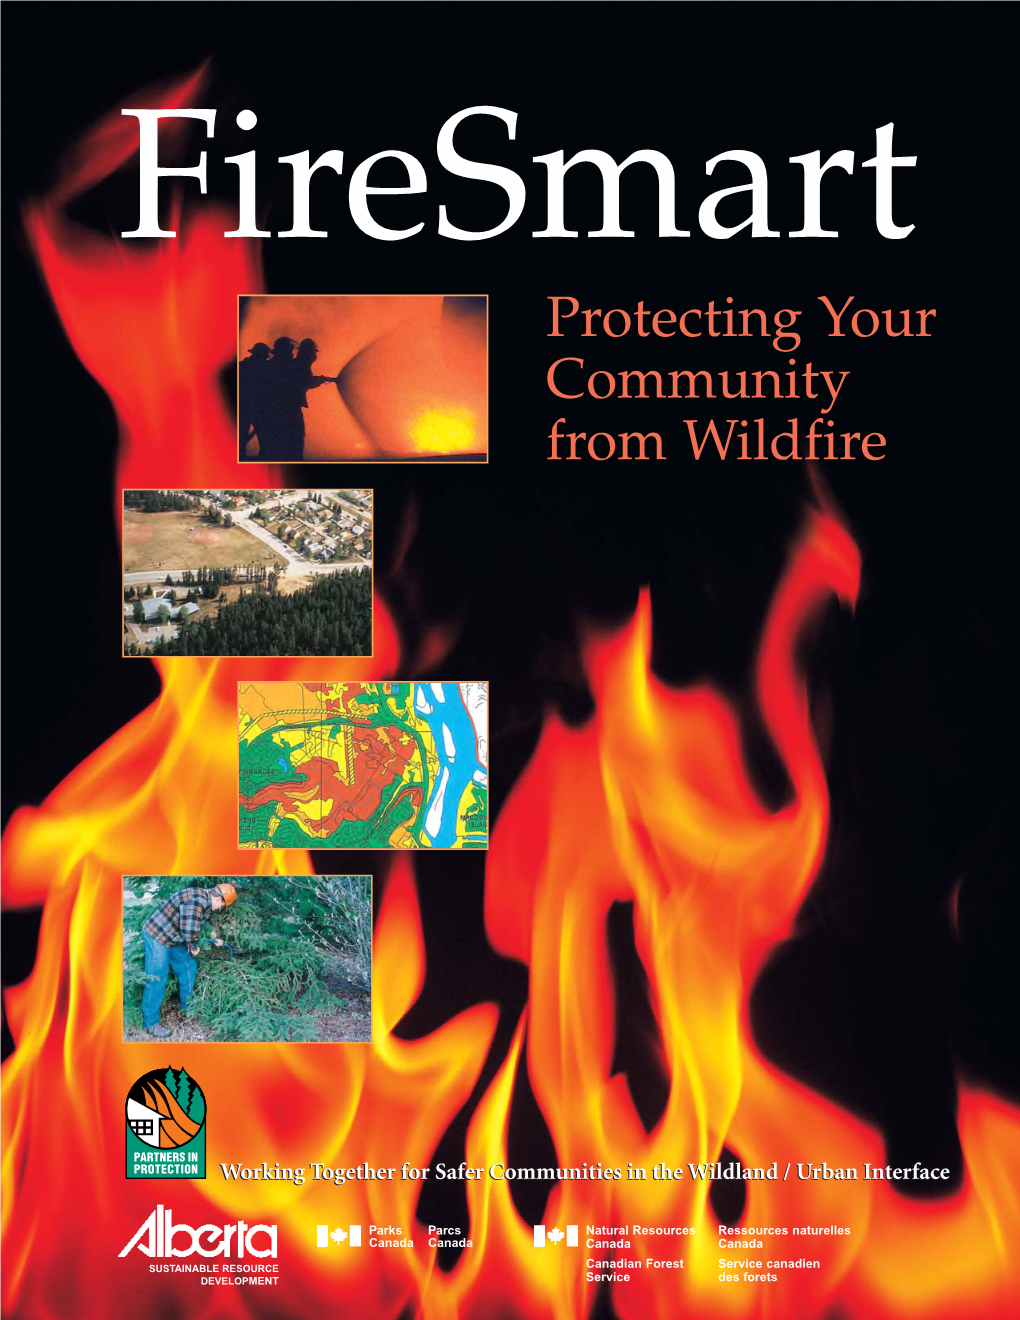 Protecting Your Community from Wildfire